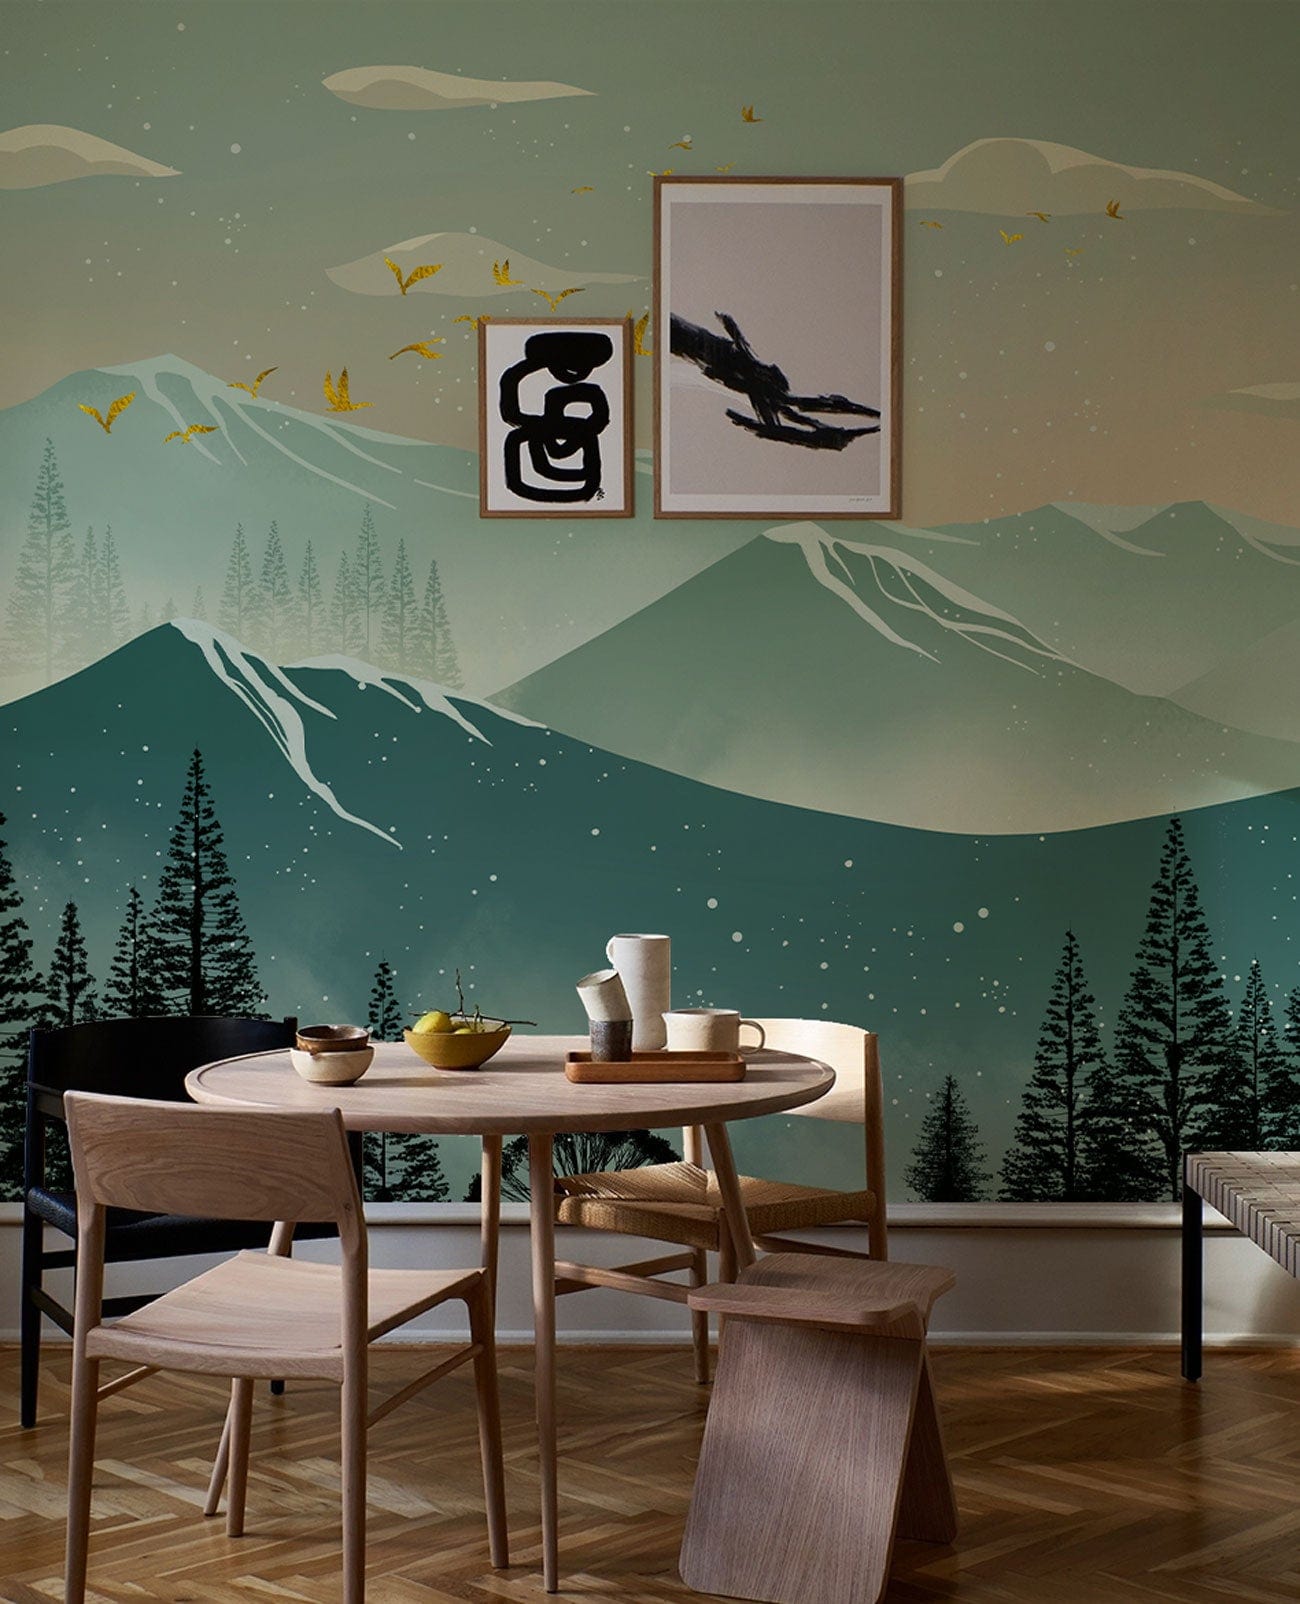 wallpaper mural with an ombre mountain scene for use in living room ideas